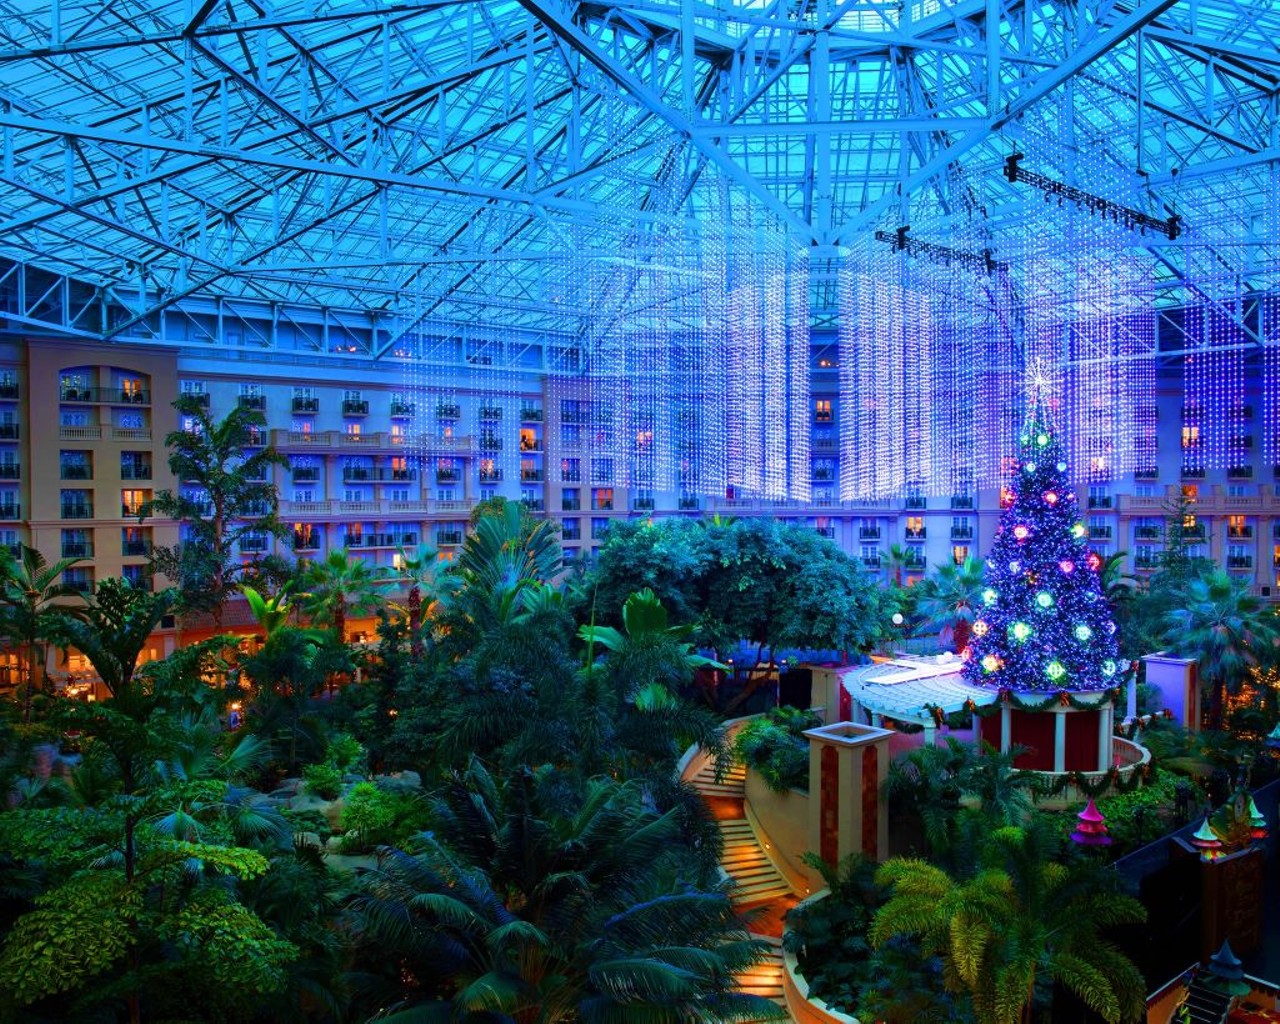 Christmas at the Gaylord Palms 
407-586-0000, 6000 W. Osceola Parkway, Kissimmee
ICE! Returns to Gaylord Palms this season, complete with masterful ice sculptures and slides. This year’s event is themed to the Grinch, who’s heart may be too small to enjoy all these festivities, but yours certainly won’t be after this spectacular display.
